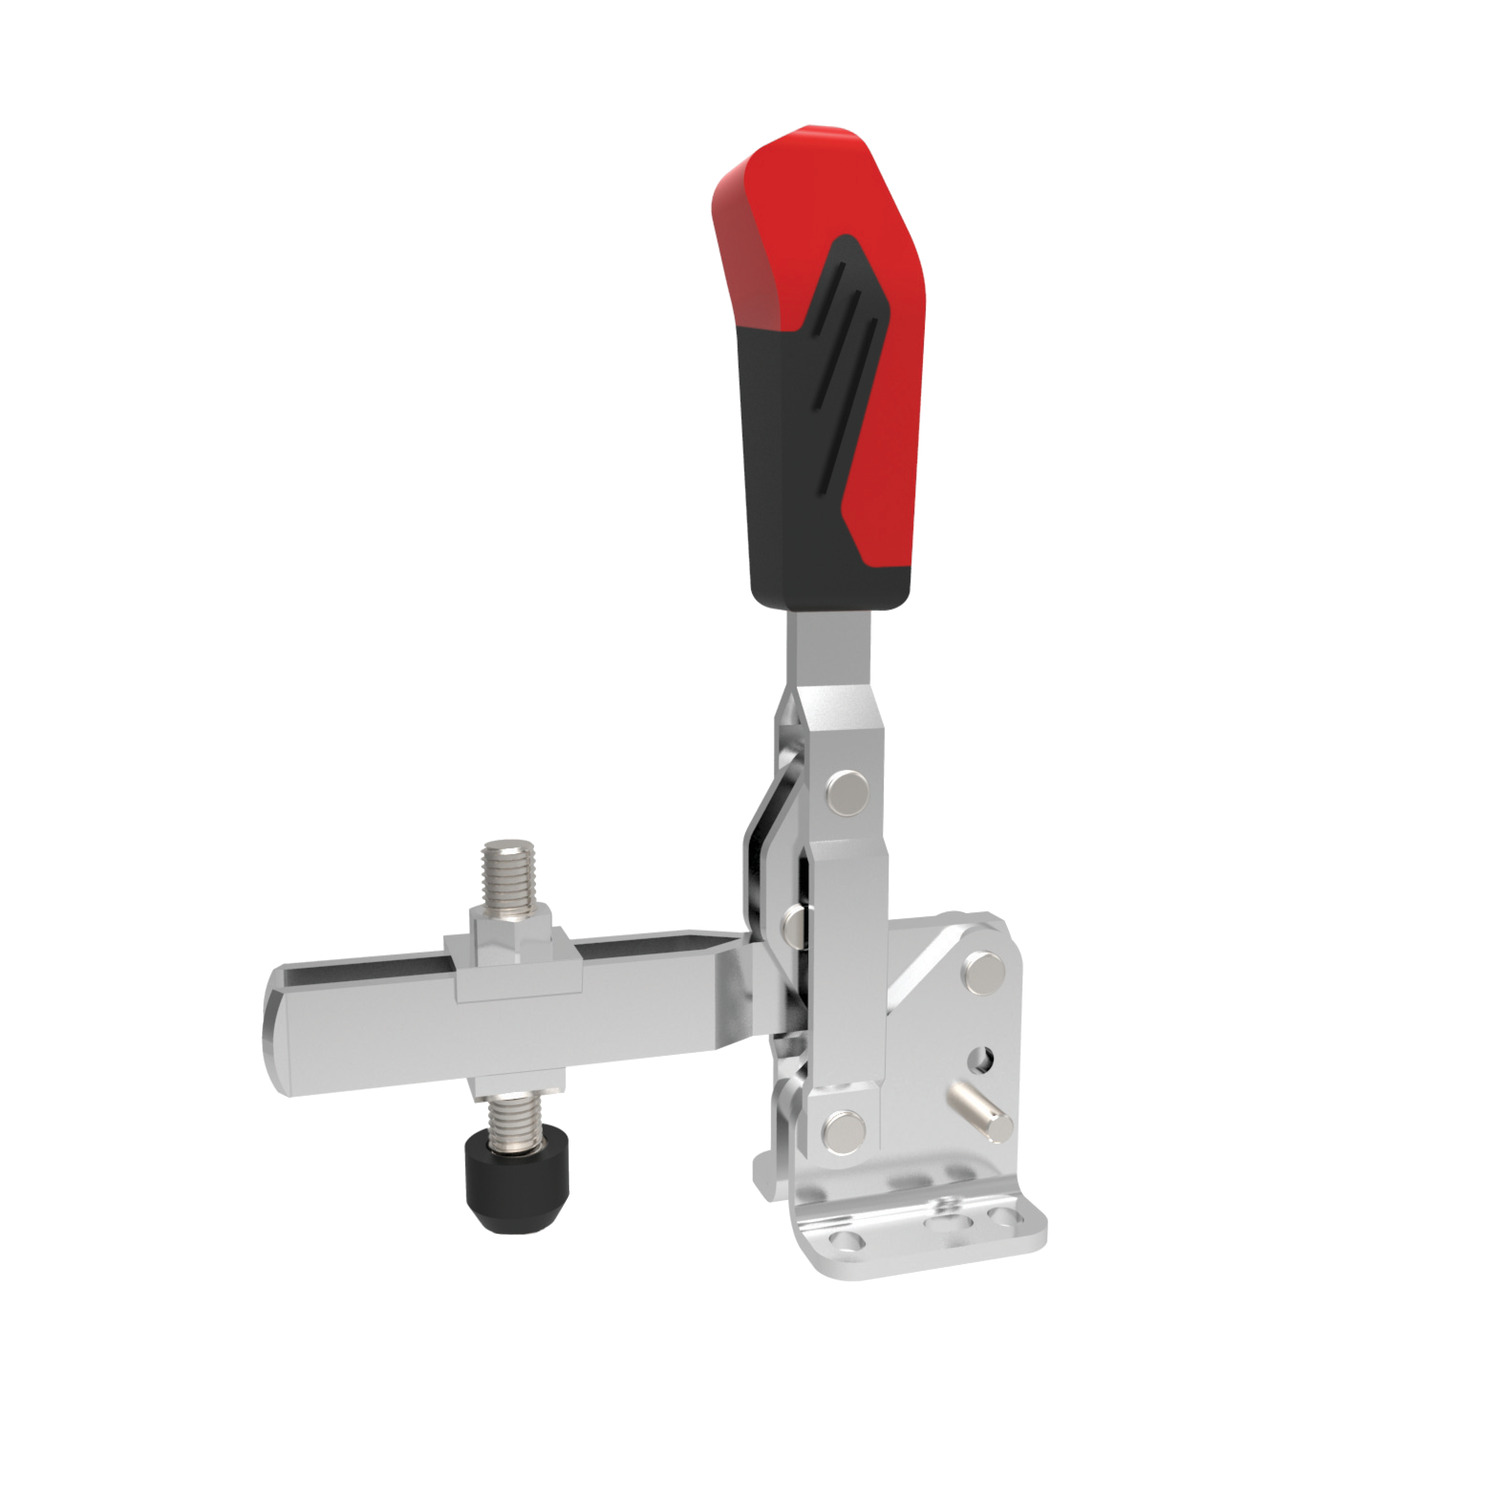 Vertical Acting Toggle Clamps Open arm and horizontal base toggle clamps made from zinc plated steel ( stainless steel versions also available, see 40020). Ideal for fastening mounting plates.